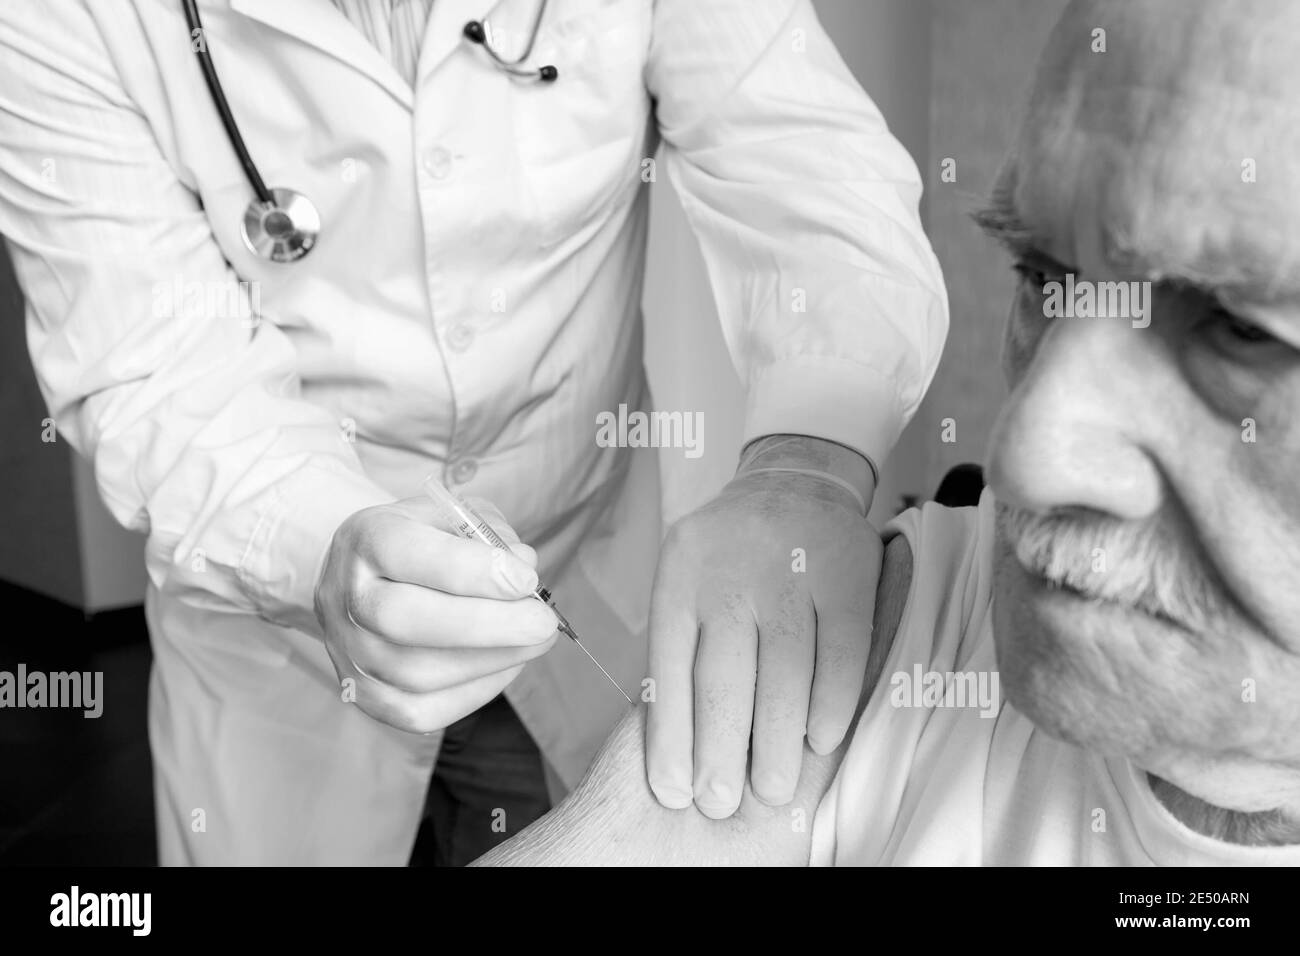 Vaccination of the elderly against viruses. A medical worker gives an injection of the covid-19 vaccine to an old, white-haired man. The old man looks Stock Photo